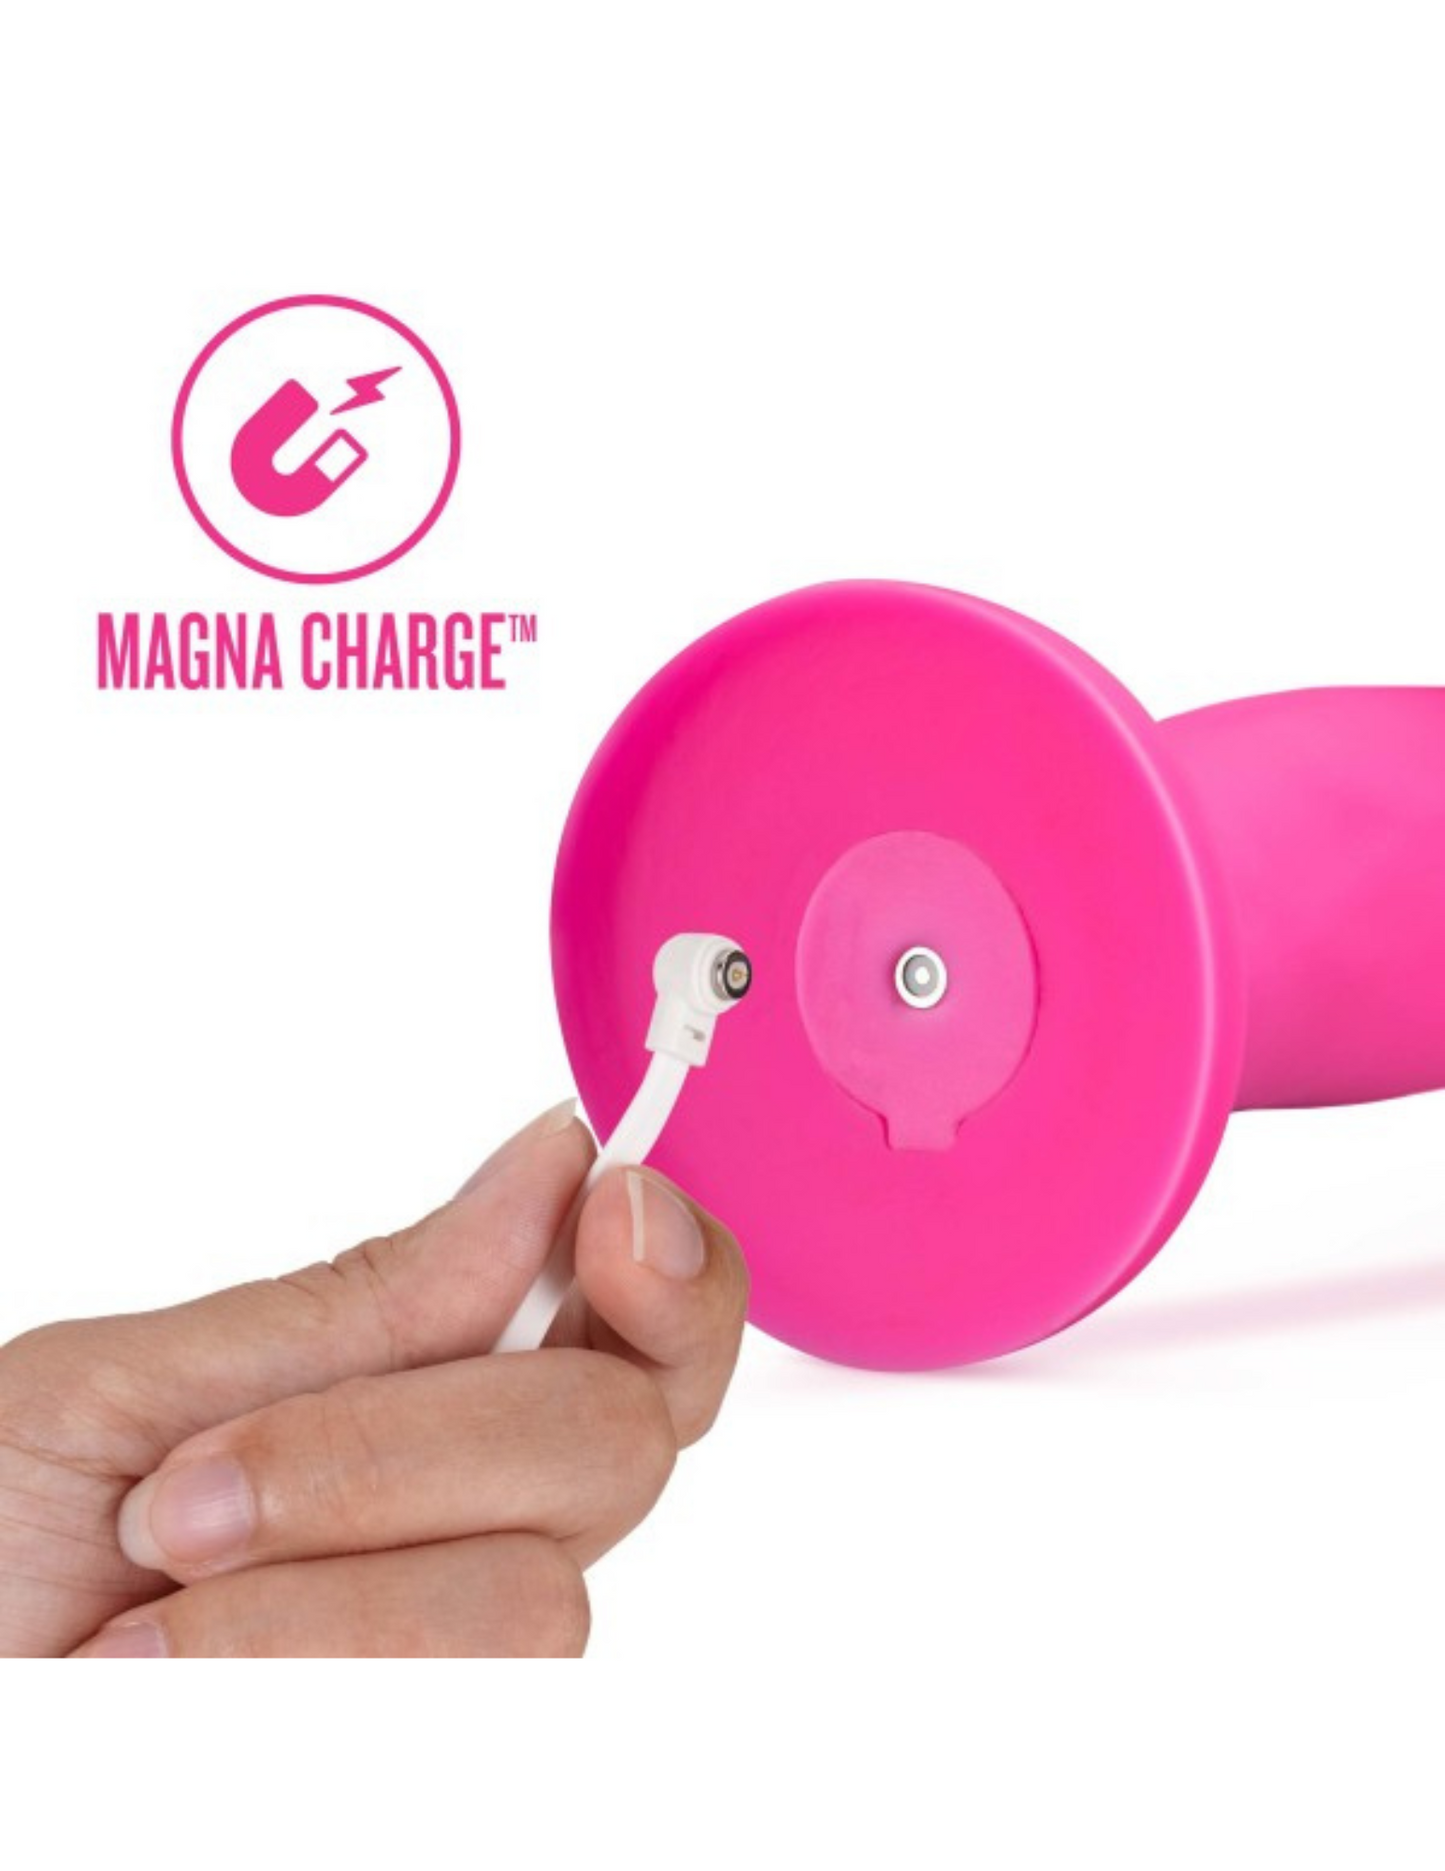 Photo shows how to use the magnetic charging cord that comes with the Havana Impressions Vibrator from Blush (pink).